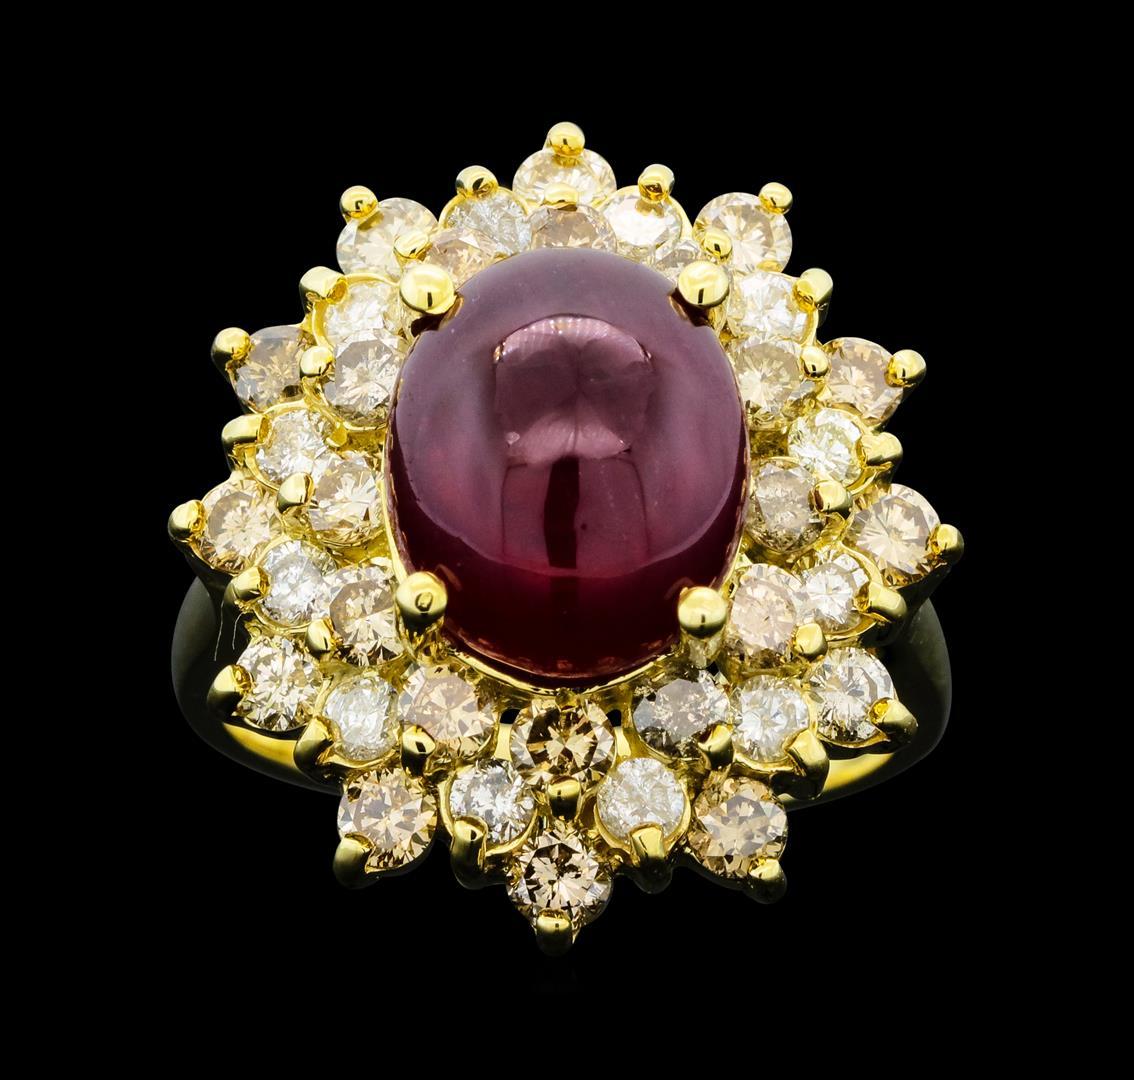 6.43 ctw Ruby And Diamond Ring - 14KT Yellow Gold